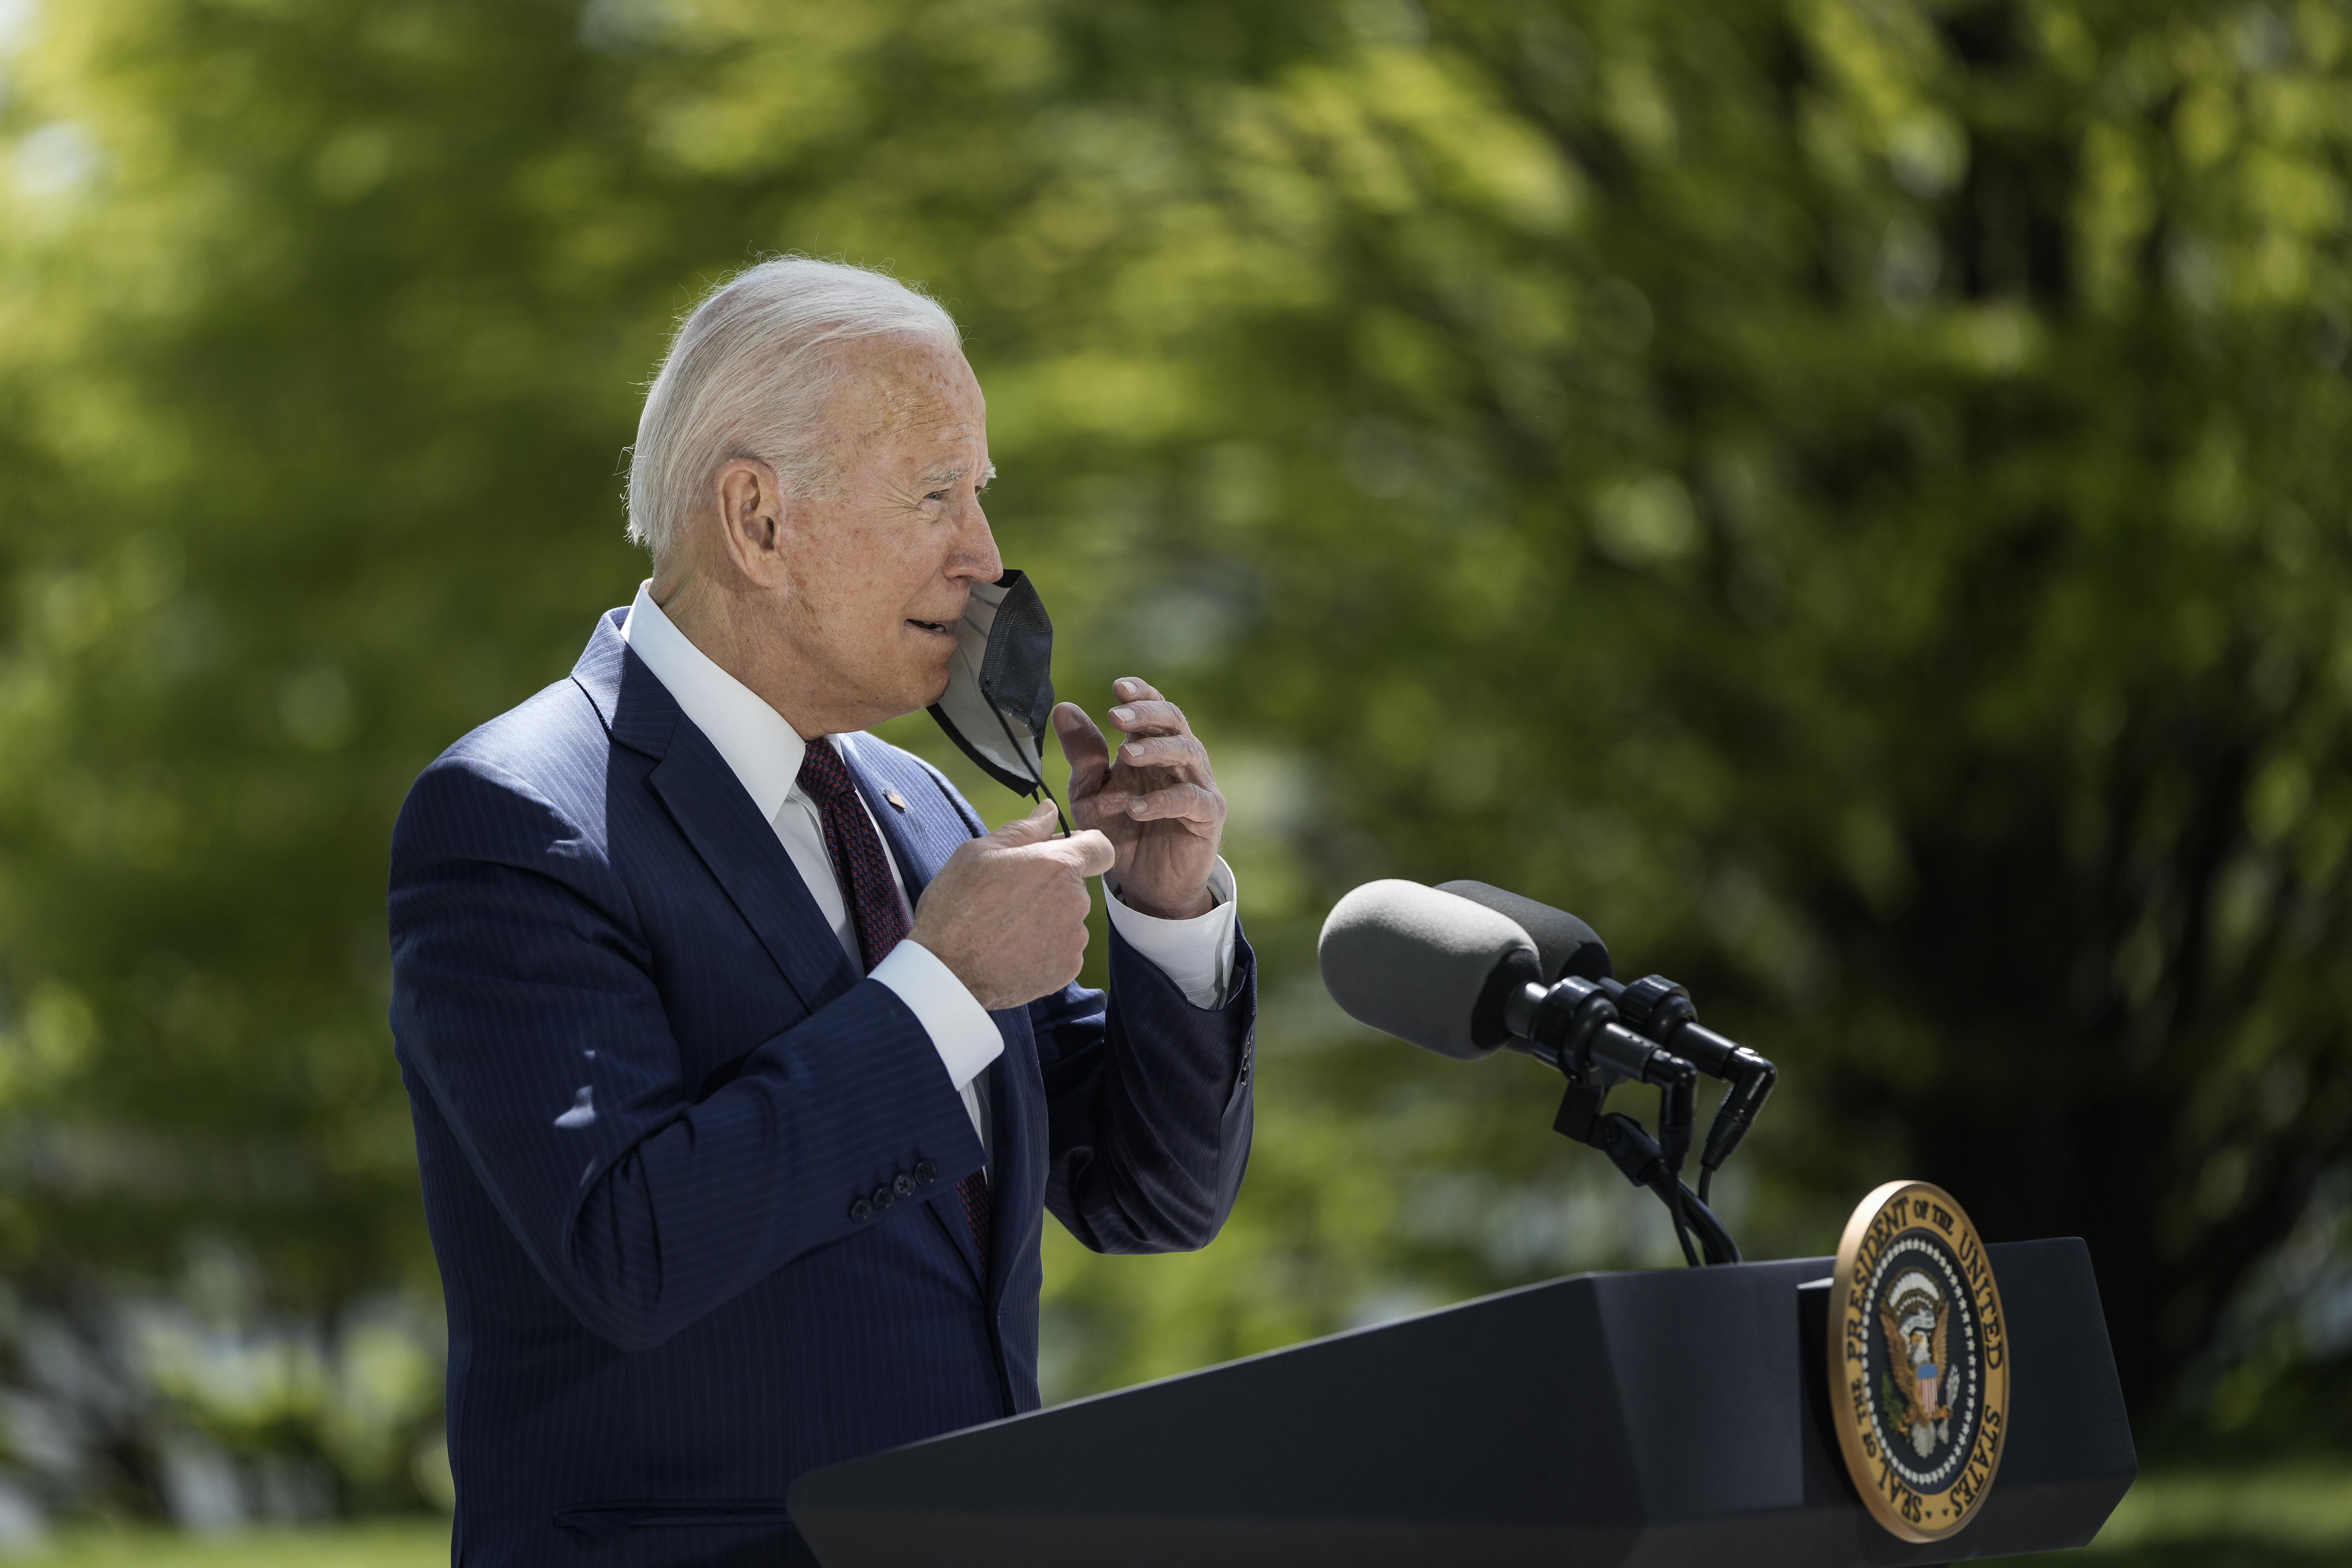 Joe Biden, seen from the side, reaches up and removes a mask from his face as he stands outdoors wearing a navy suit at a presidential lectern with green trees in the background.